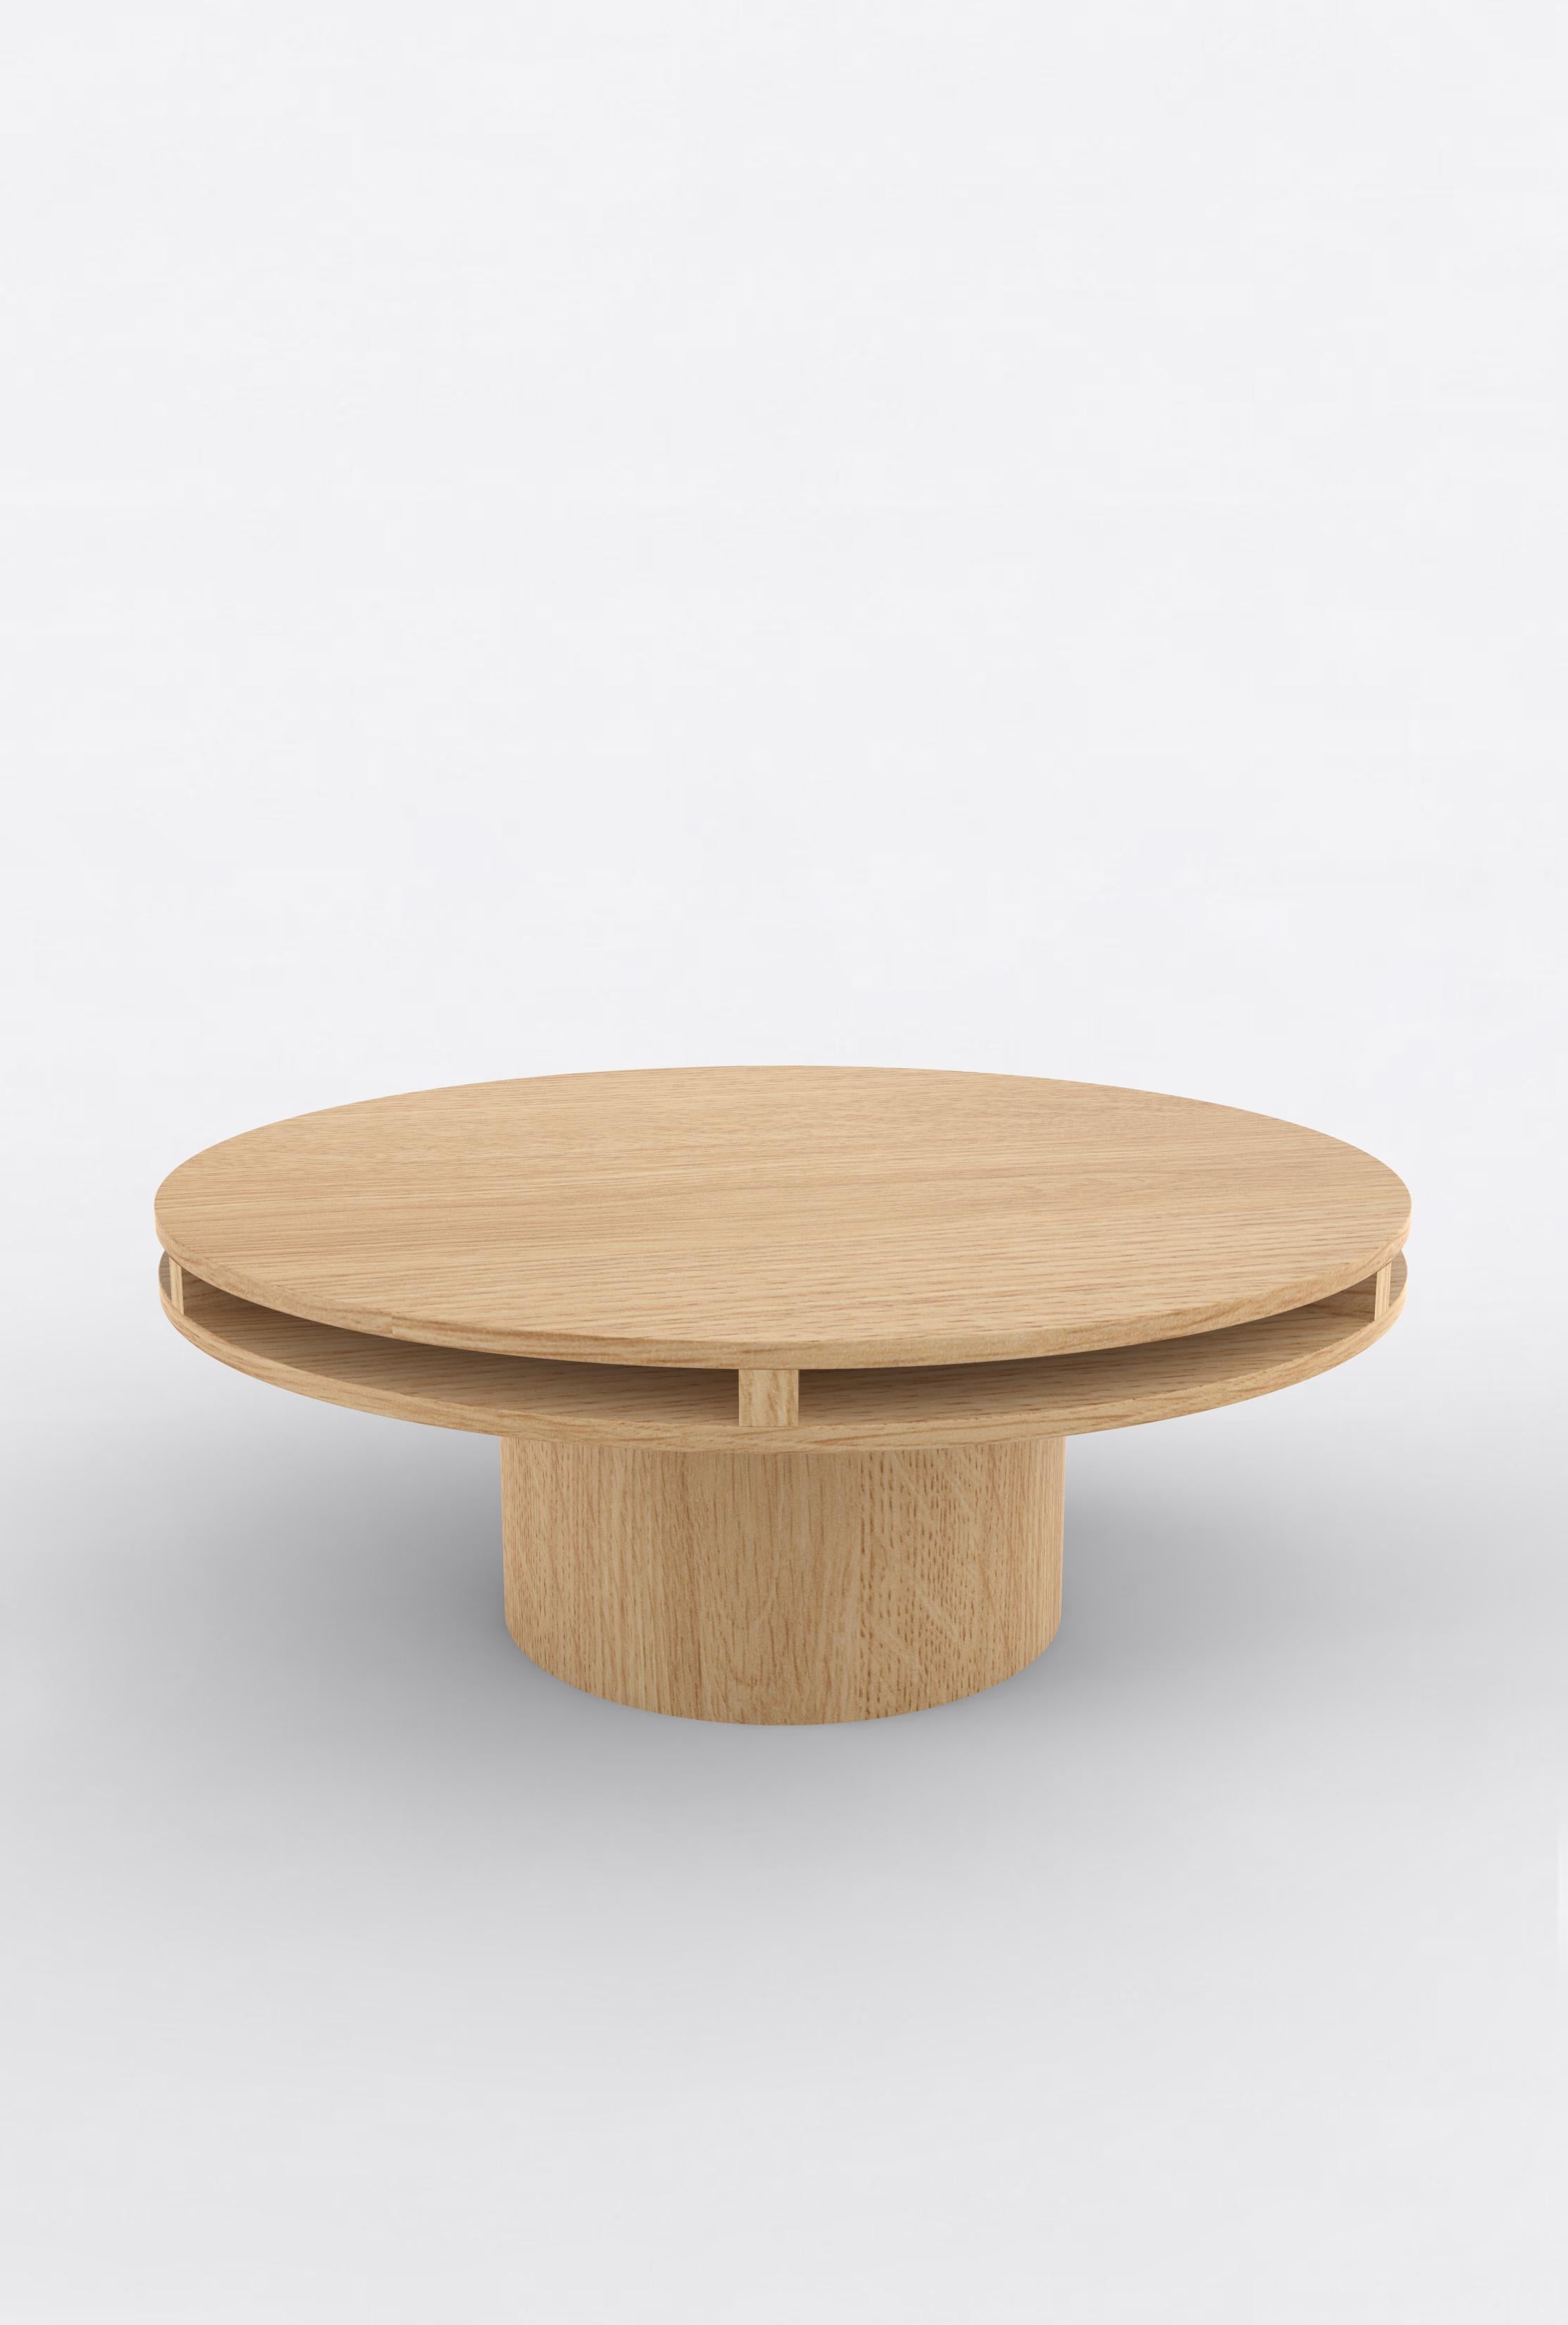 Post-Modern Contemporary 102 Coffee Table in Oak and White by Orphan Work For Sale